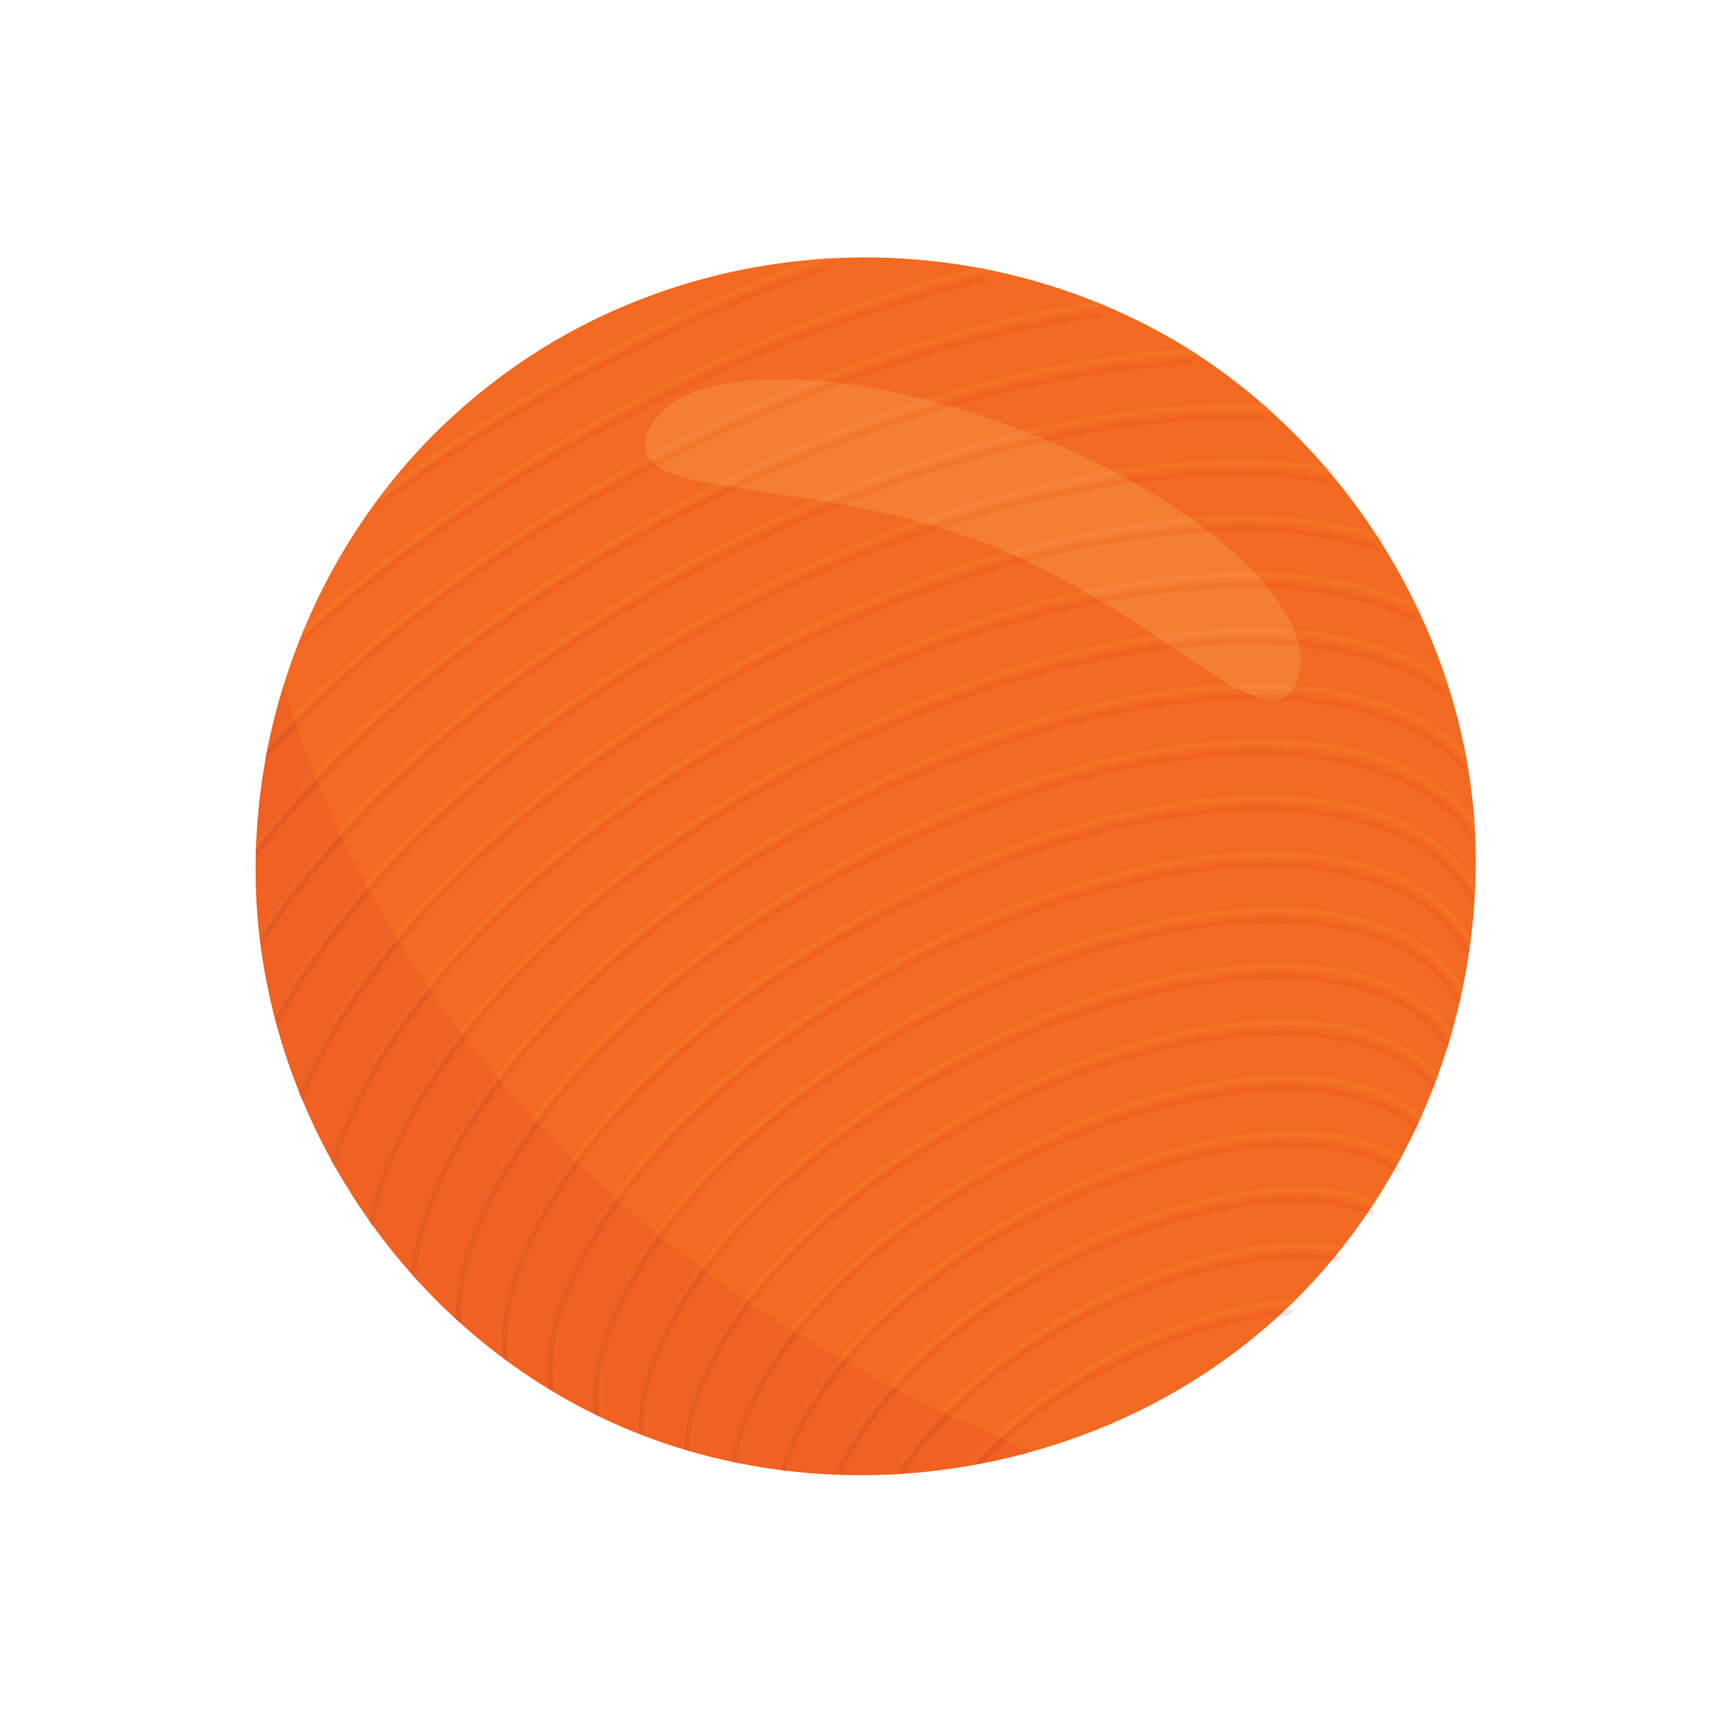 Fit ball, sport equipment. Fitball vector isolated icon. Health aerobic circle. Fitness ball isolated. Orange flat exercise ball